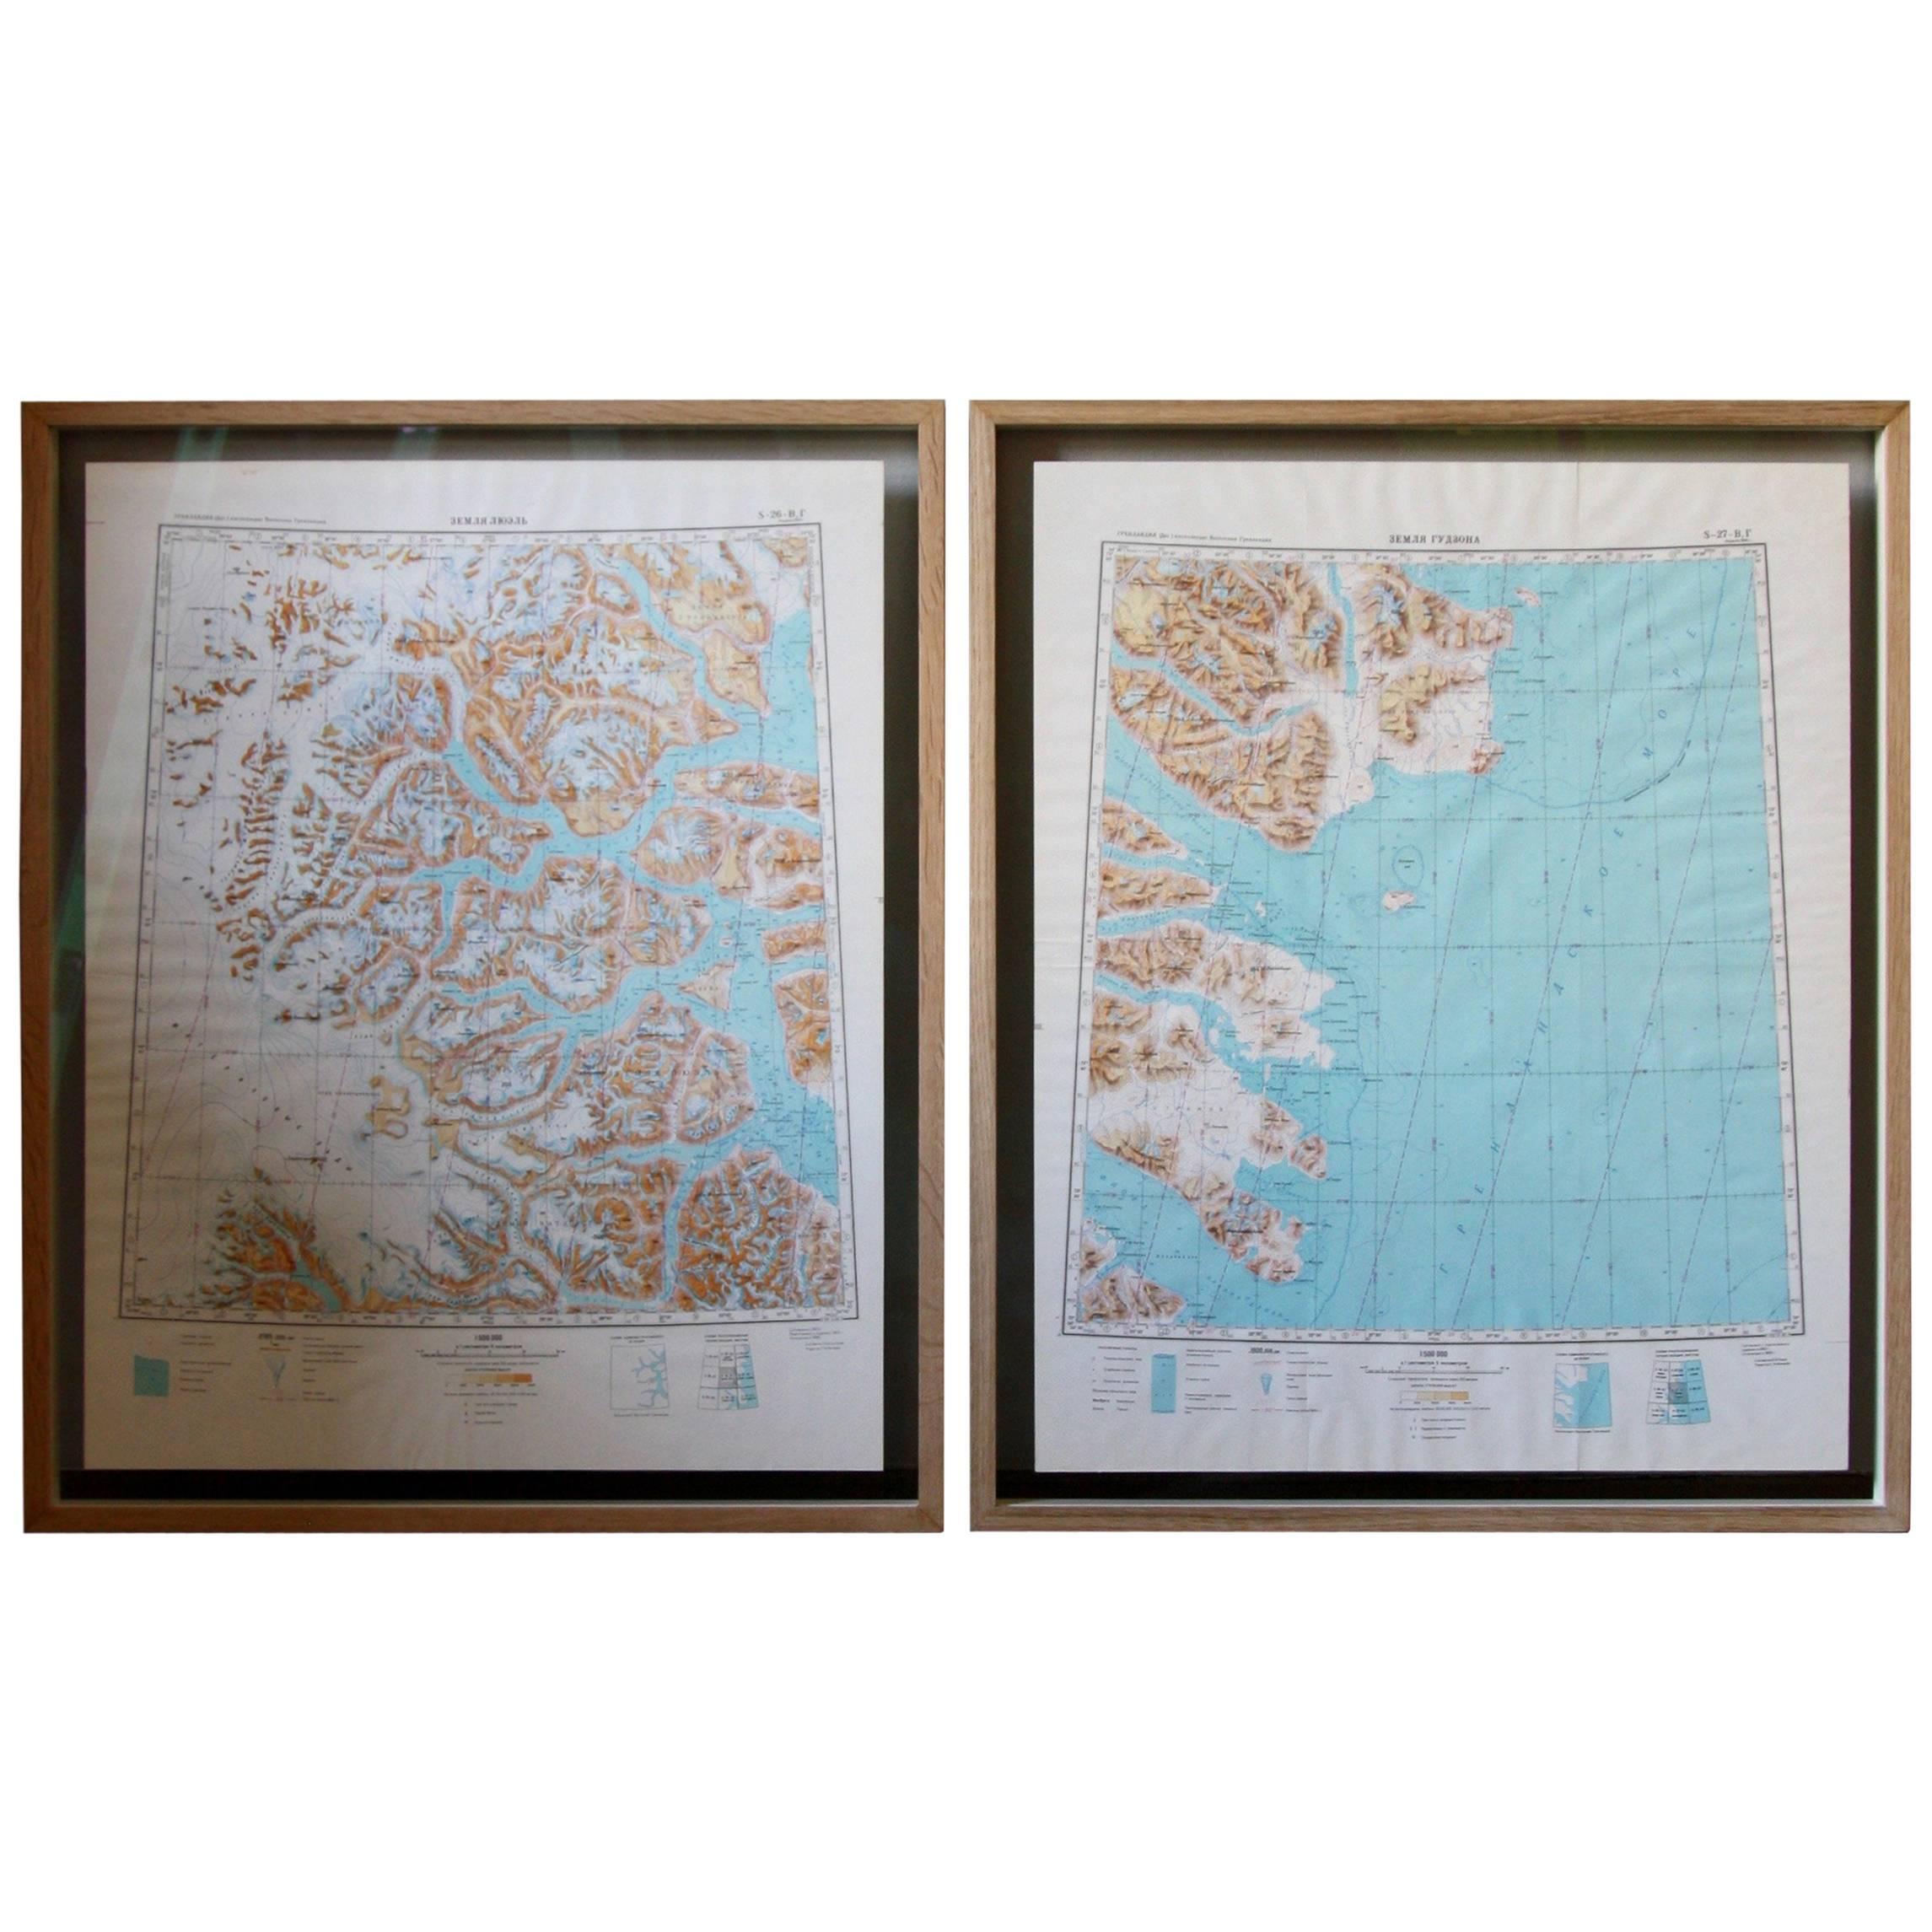 Framed Pair of Vintage Mid Century Soviet Maps of a Section of Greenland